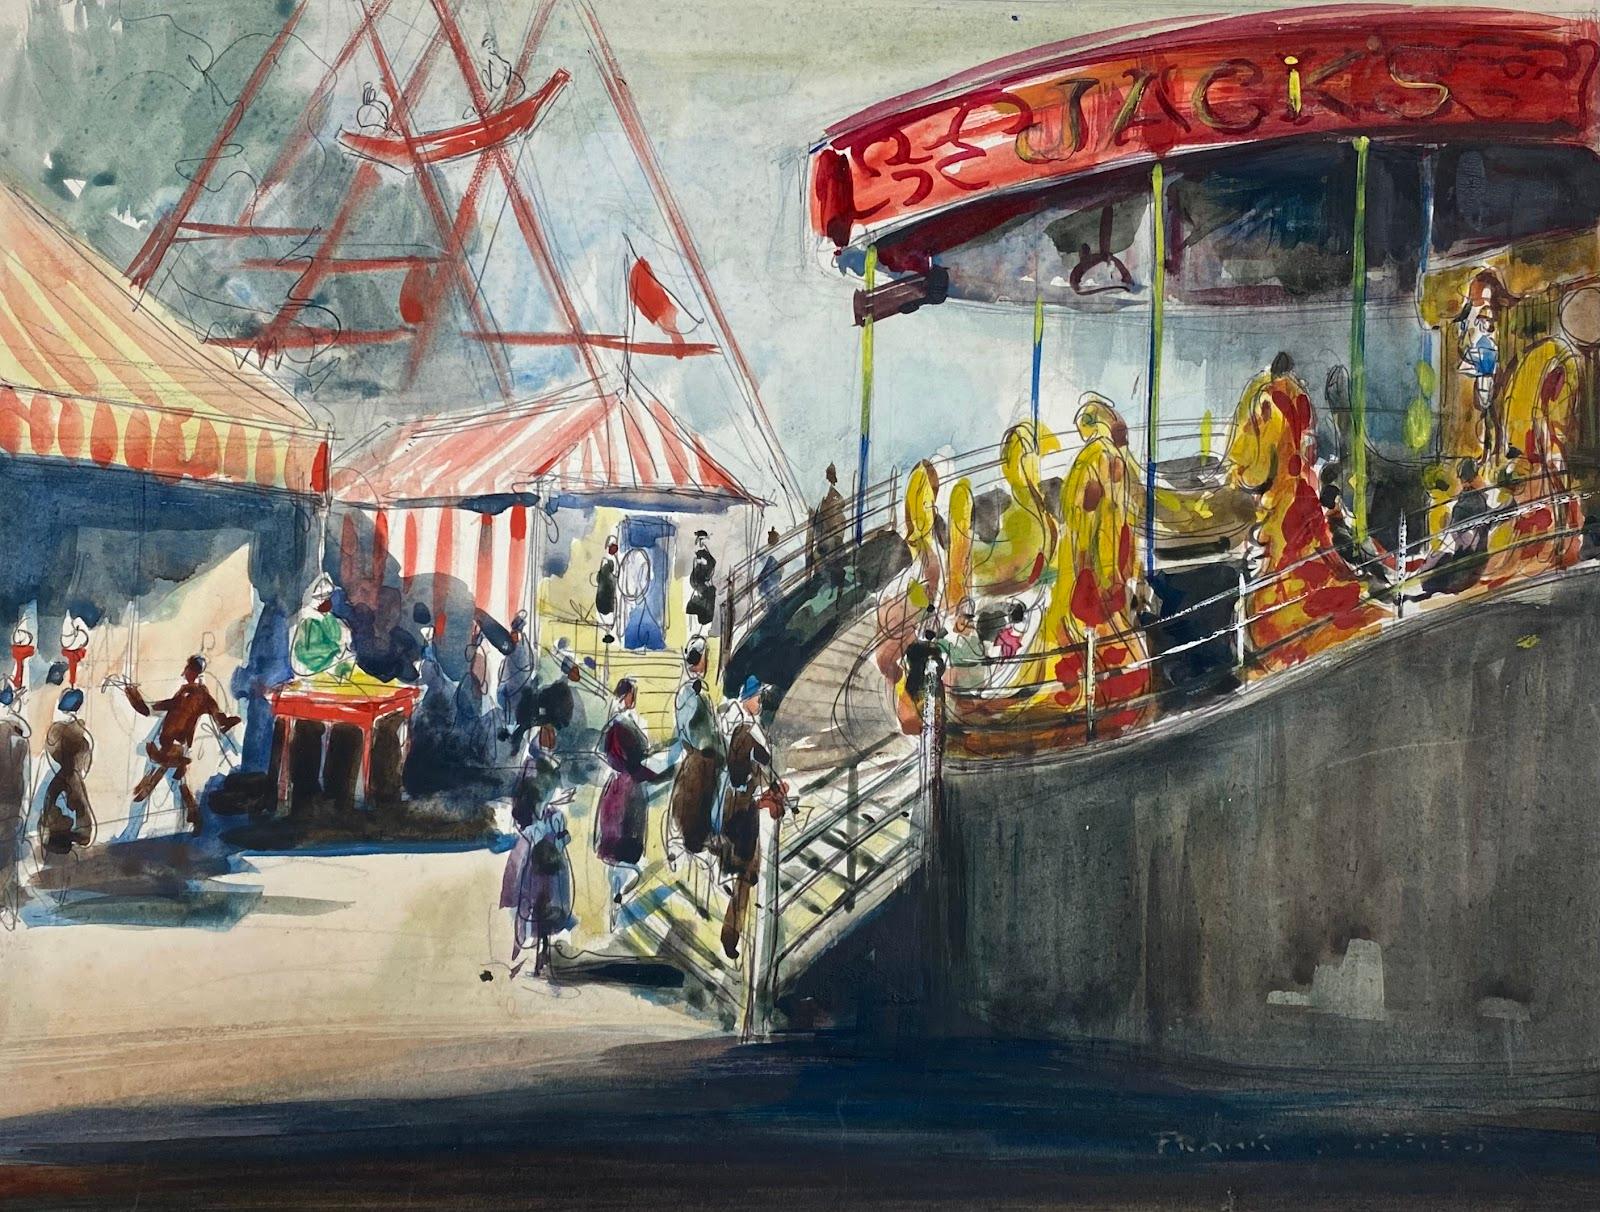 British Impressionist Painting The Carousel At A FunFair